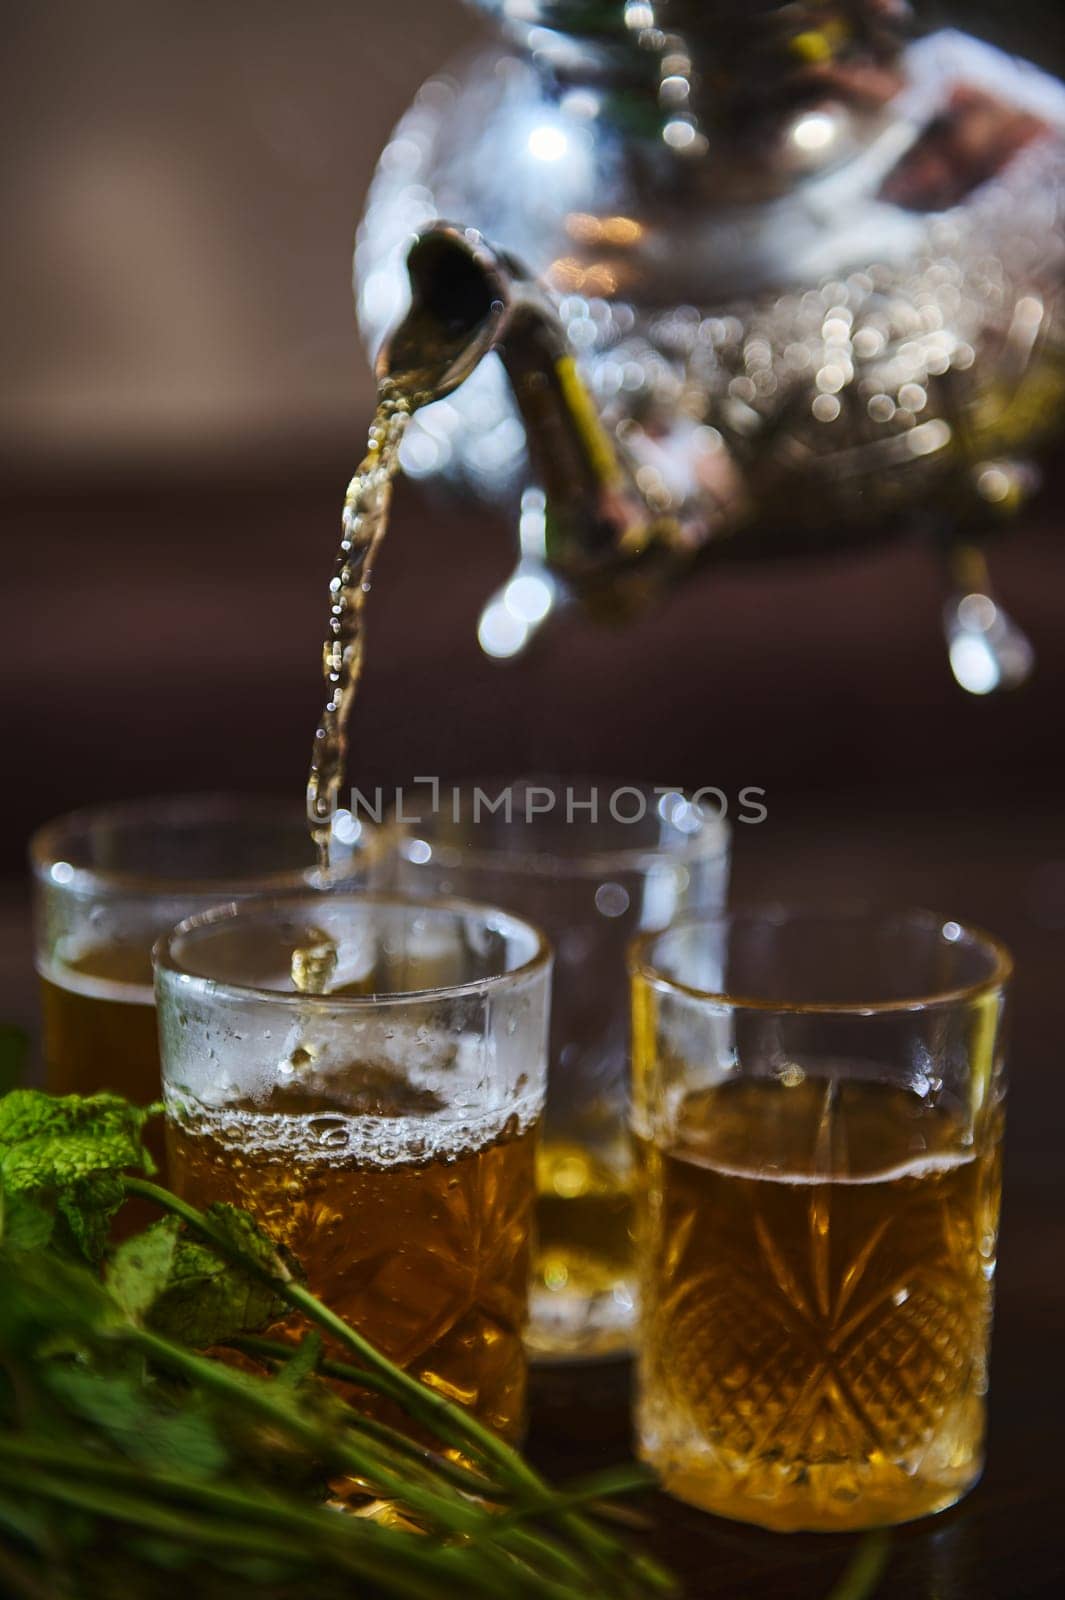 Pouring delicious Moroccan mint tea from a silver teapot into drinking glasses. Bunch of fresh mint in the foreground by artgf